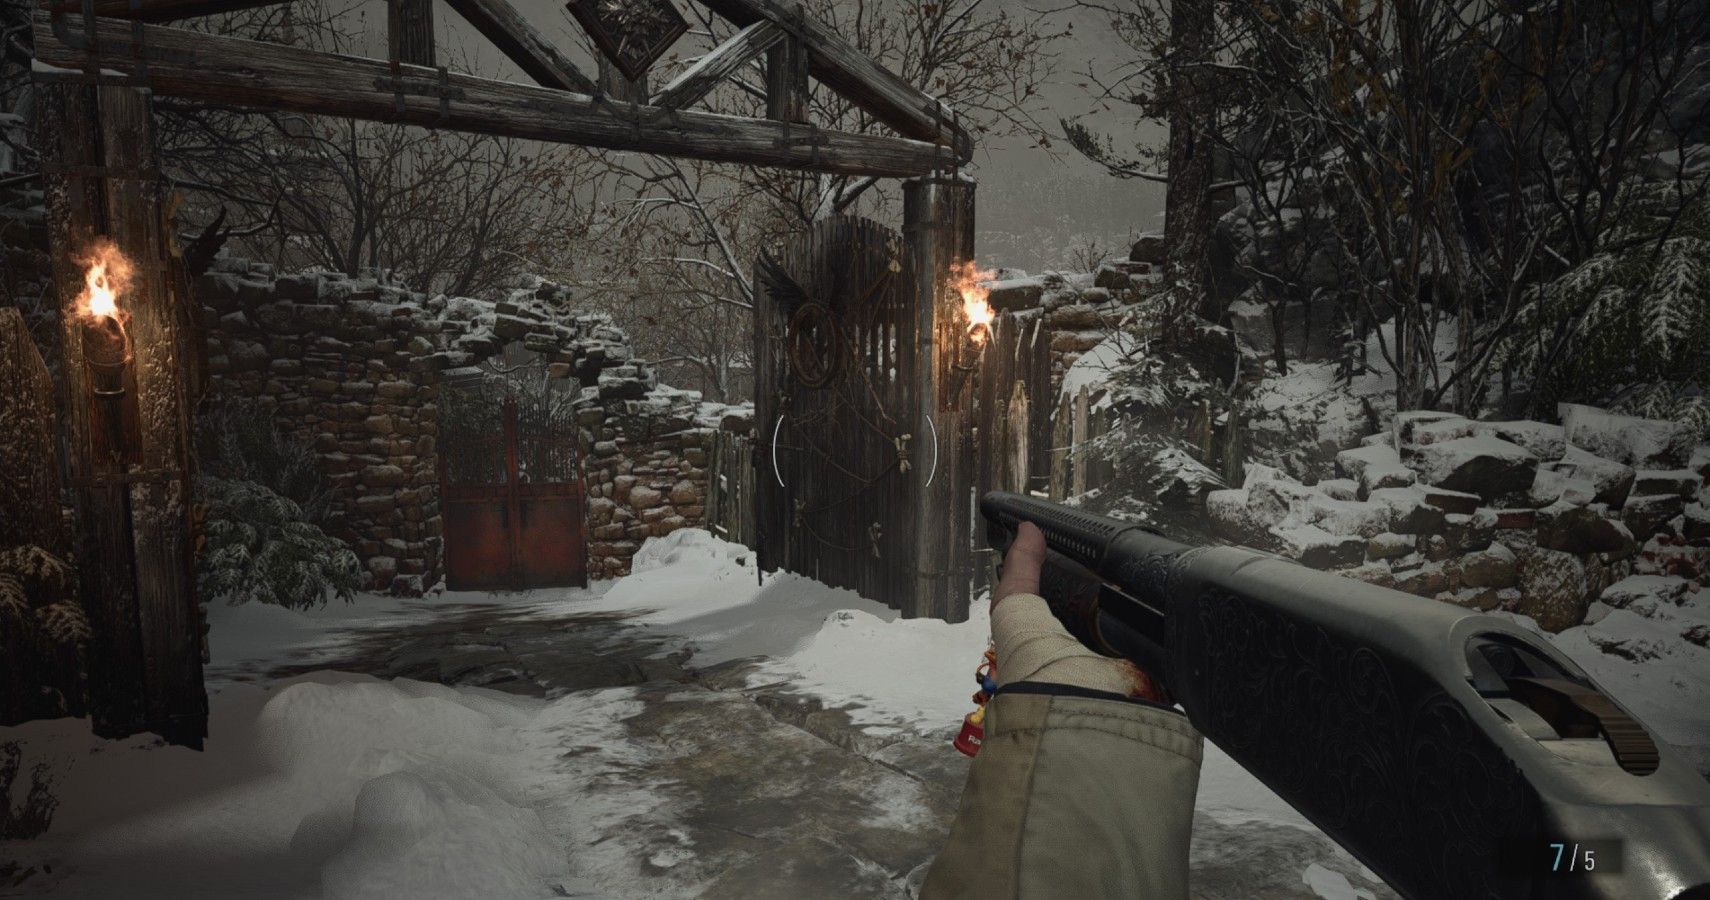 Ethan using a shotgun while having it equipped with a charm.